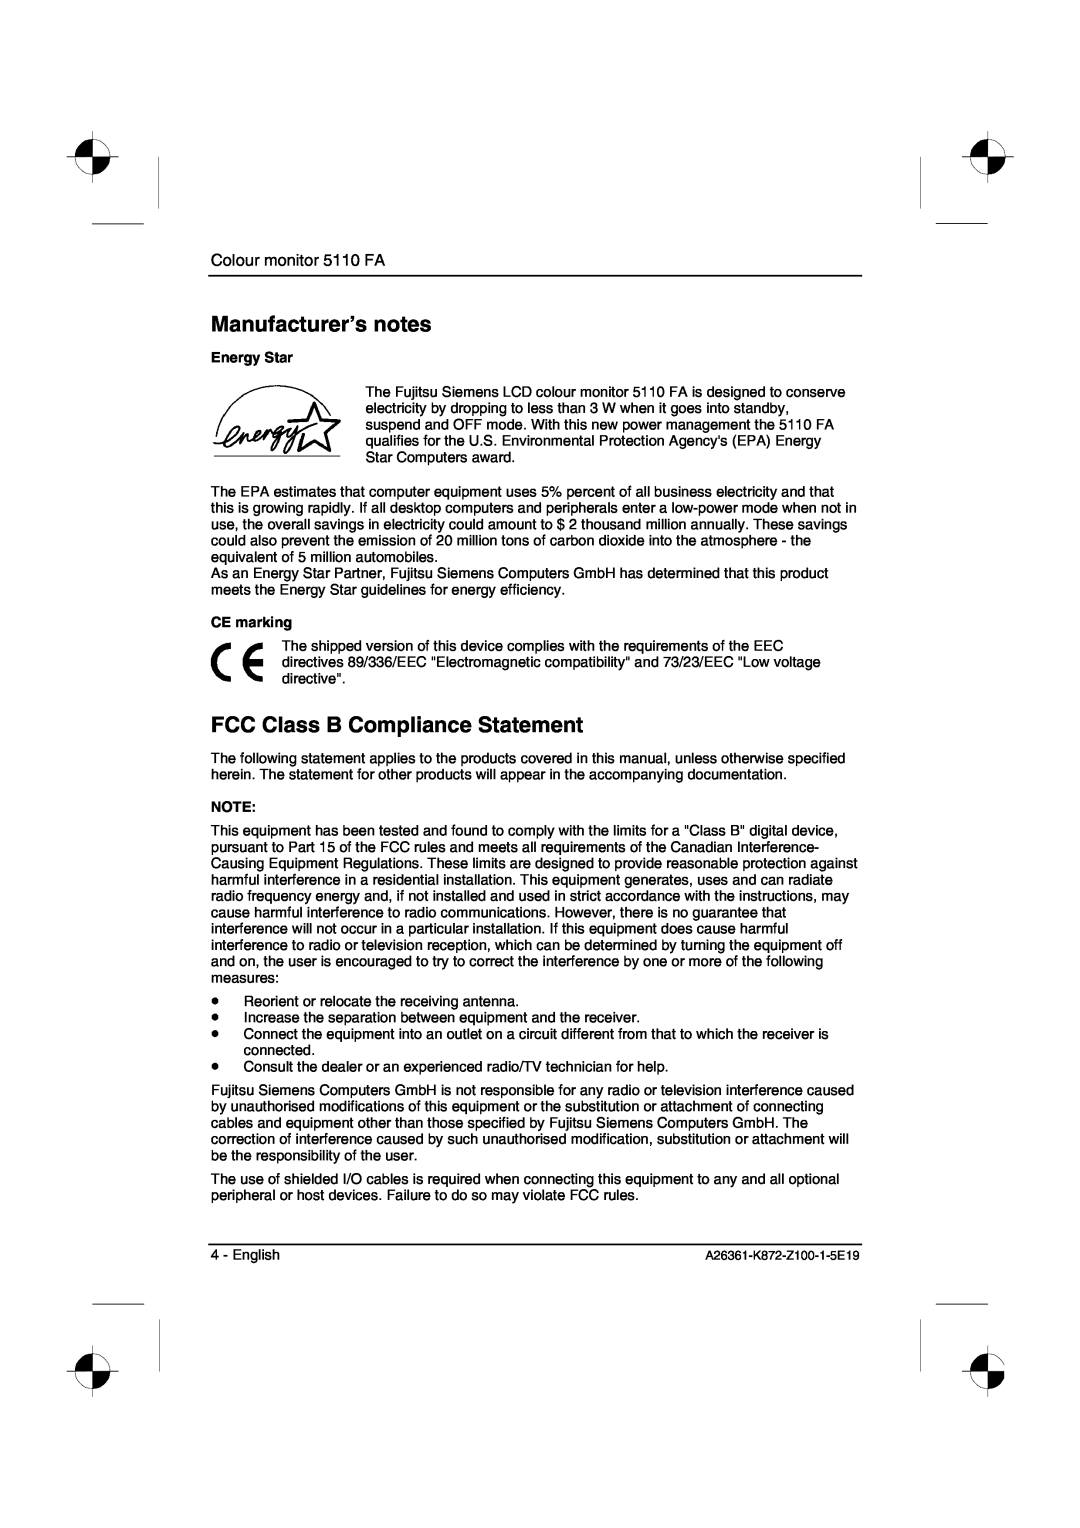 Fujitsu Siemens Computers 5110 FA manual Manufacturer’s notes, FCC Class B Compliance Statement, Energy Star, CE marking 